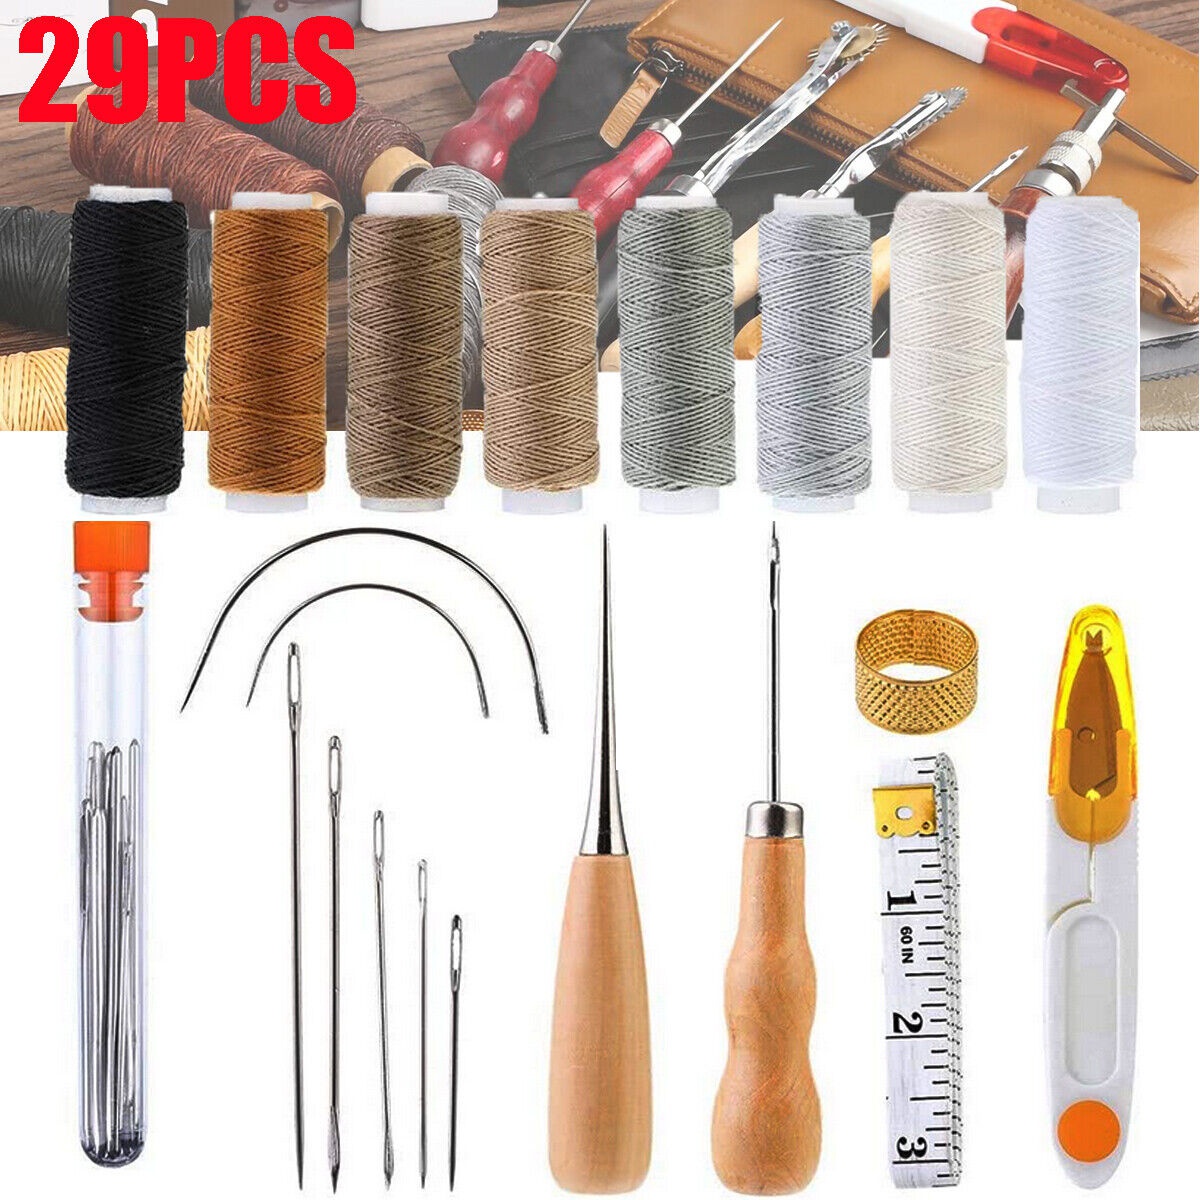 3mm Leather Stitching Awl Diy Handcraft Professional Strong